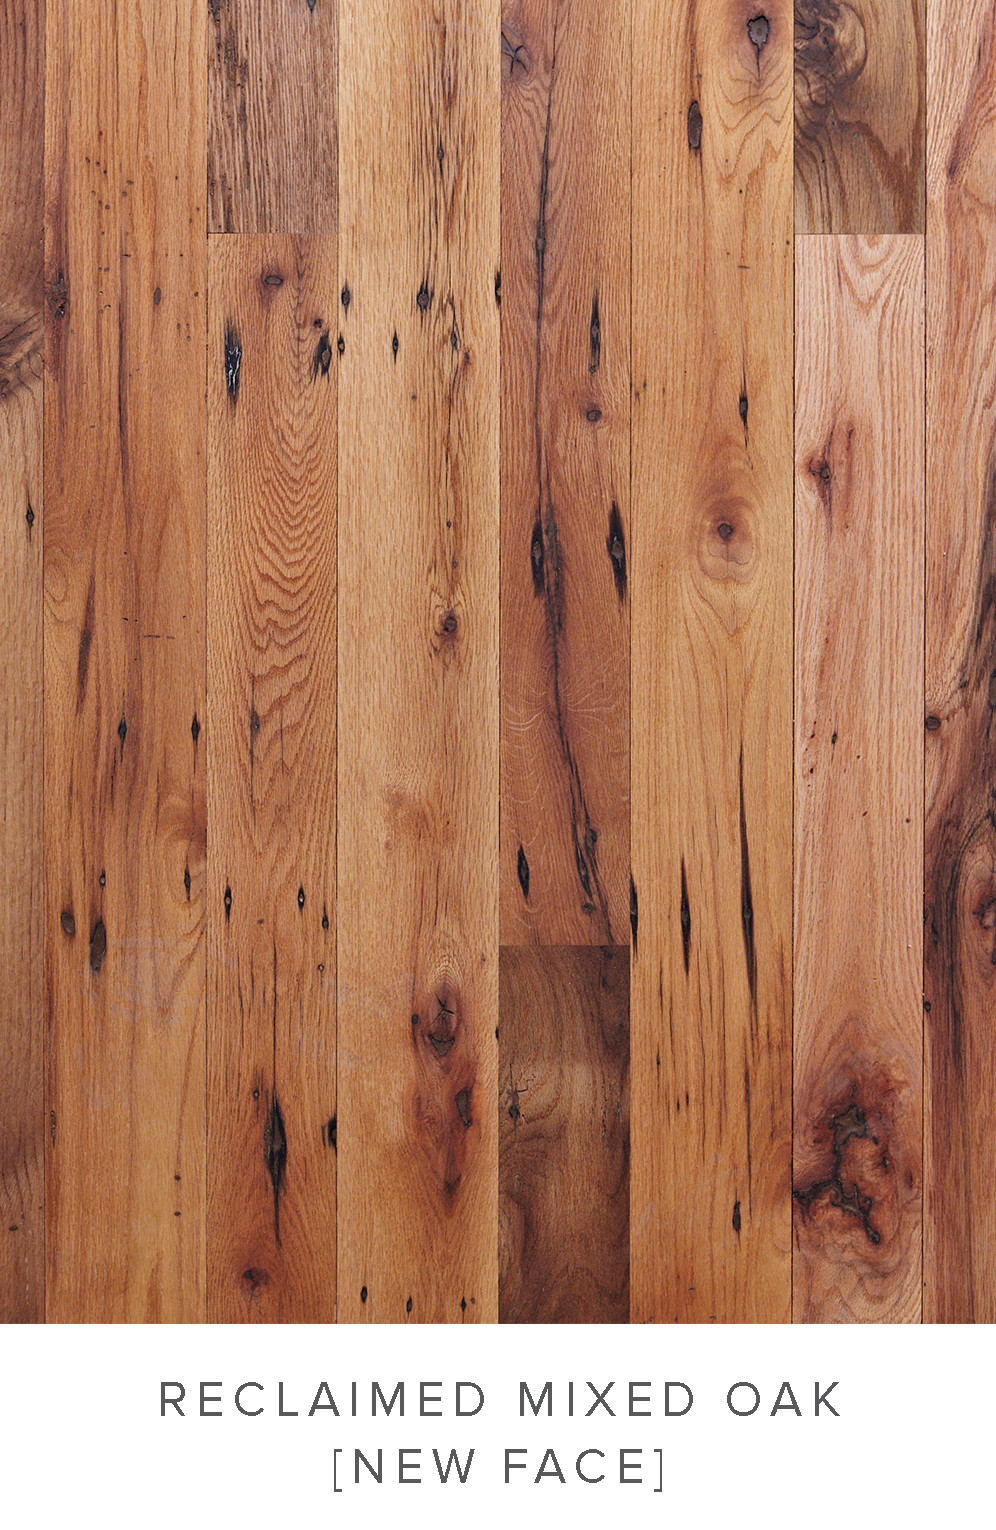 28 Famous 5 Red Oak Hardwood Flooring 2023 free download 5 red oak hardwood flooring of extensive range of reclaimed wood flooring all under one roof at the inside reclaimed mixed oak new face